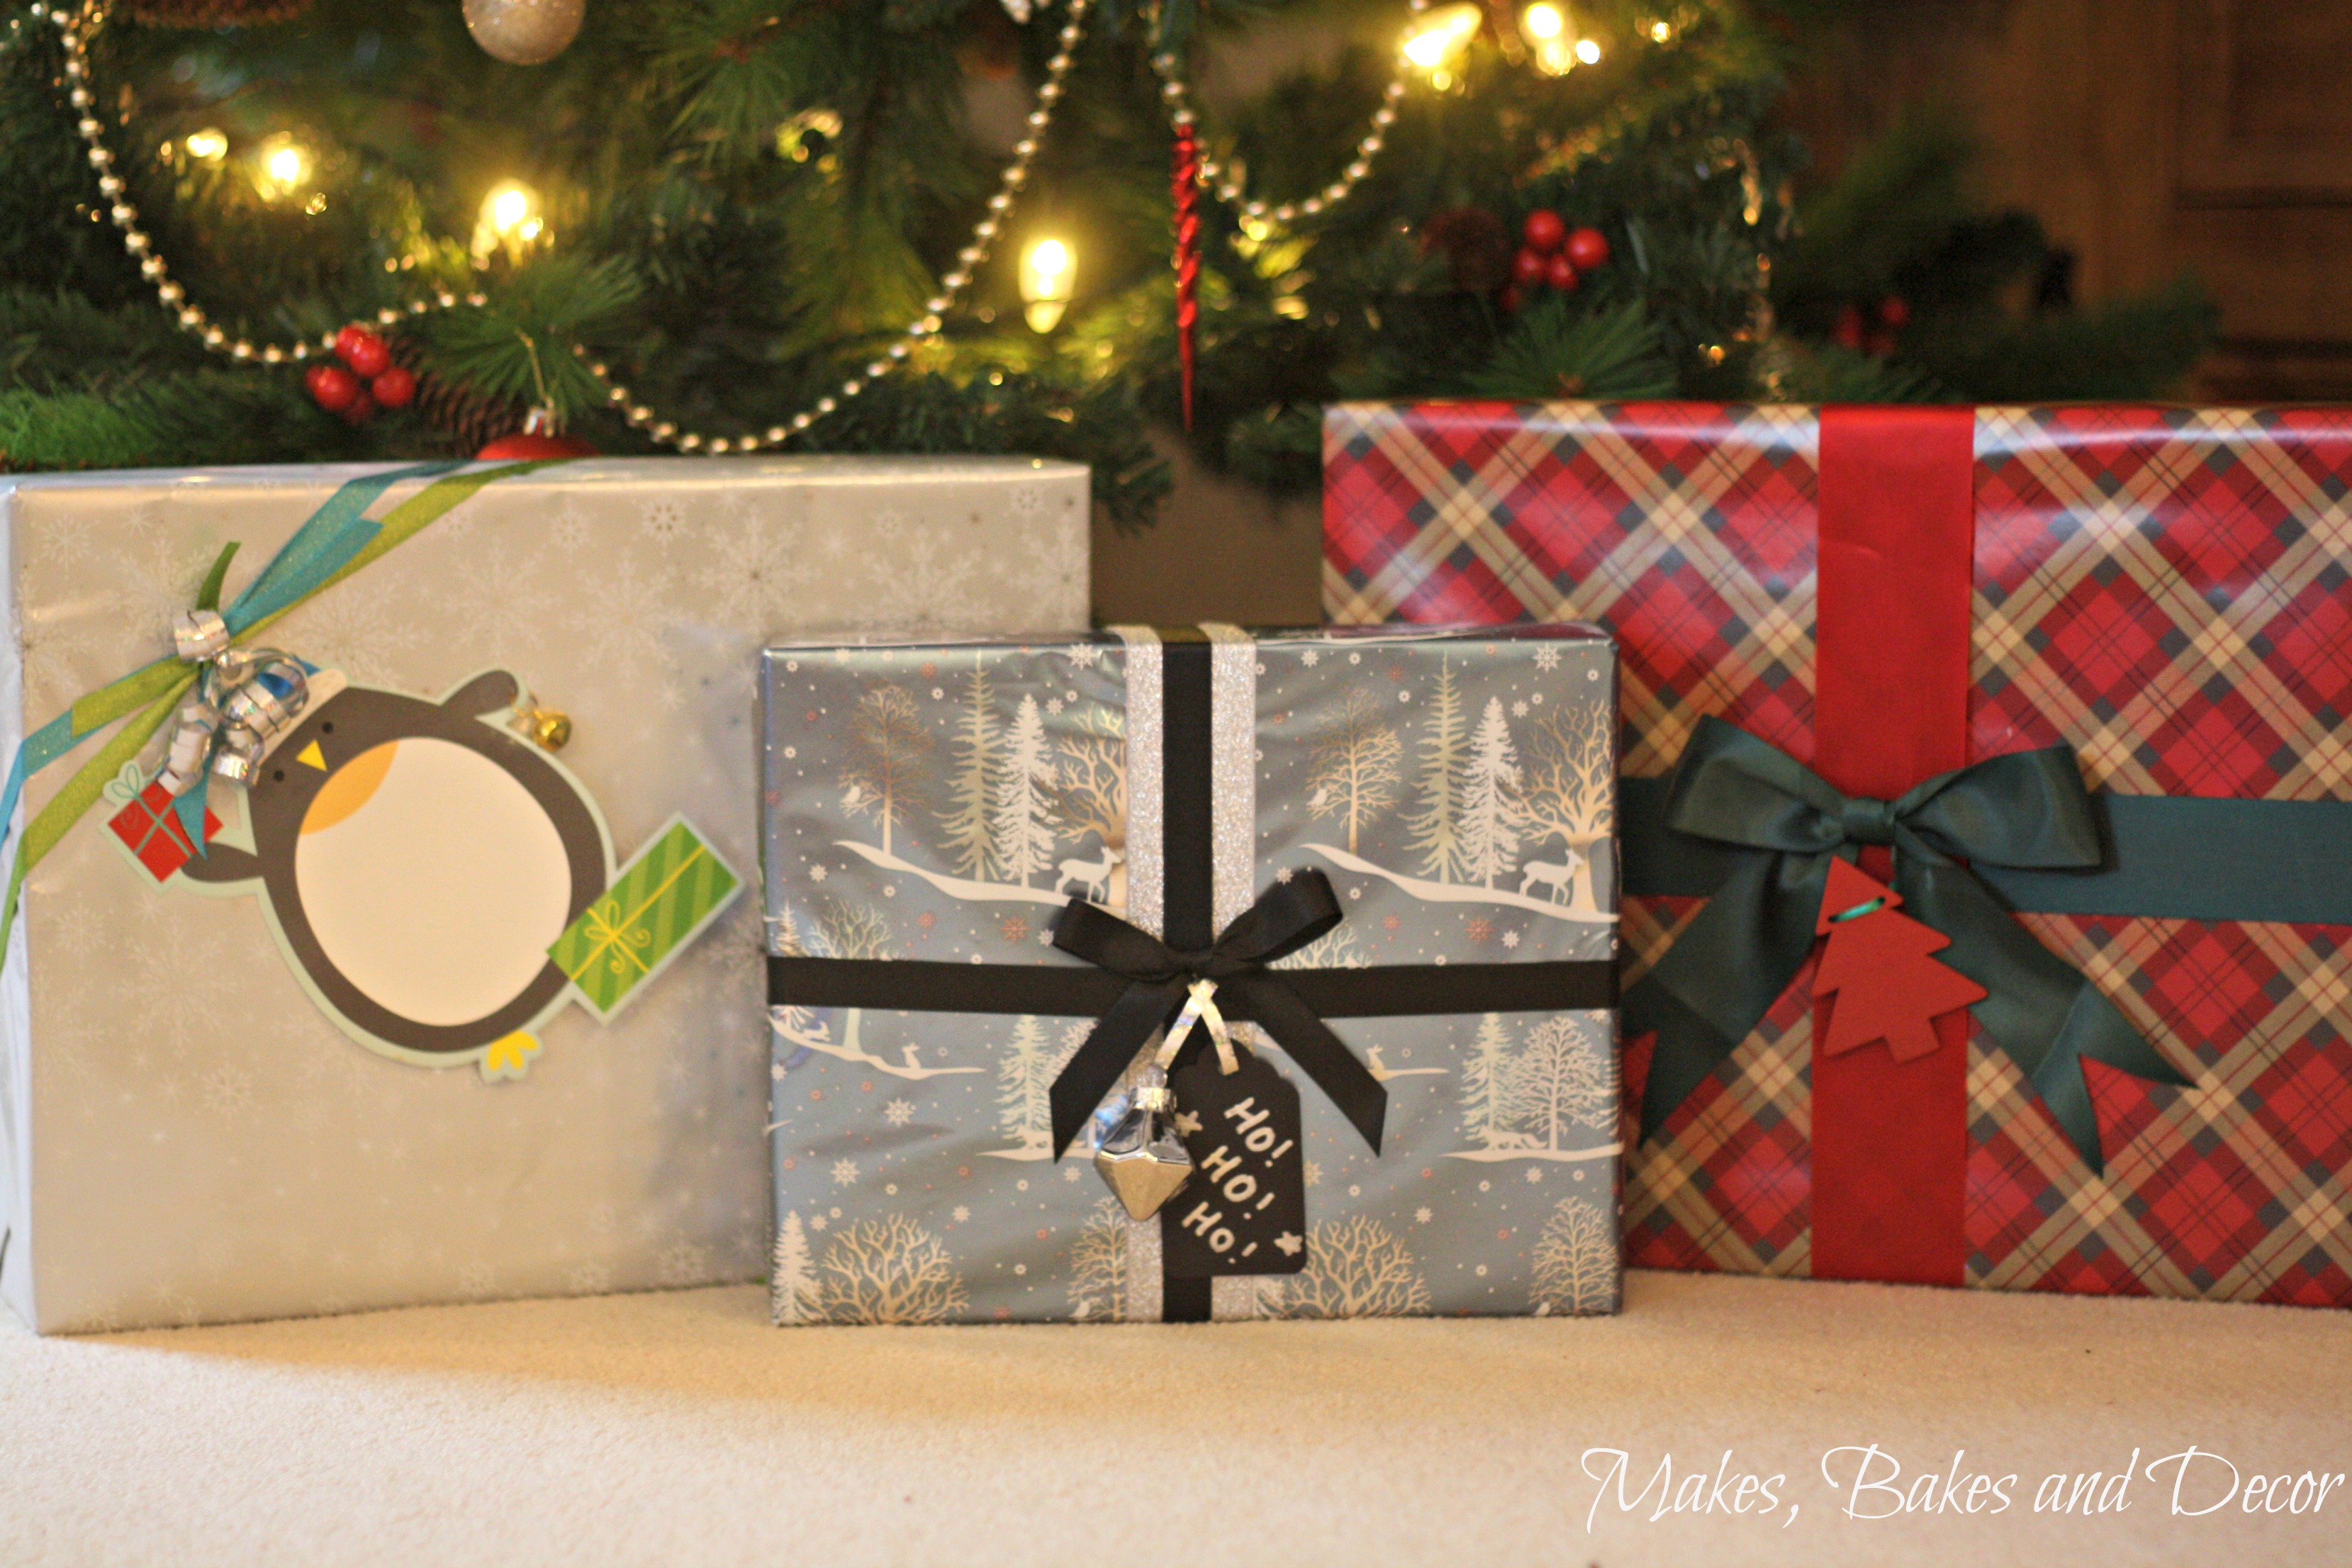 3 ways to wrap your gifts this year 1